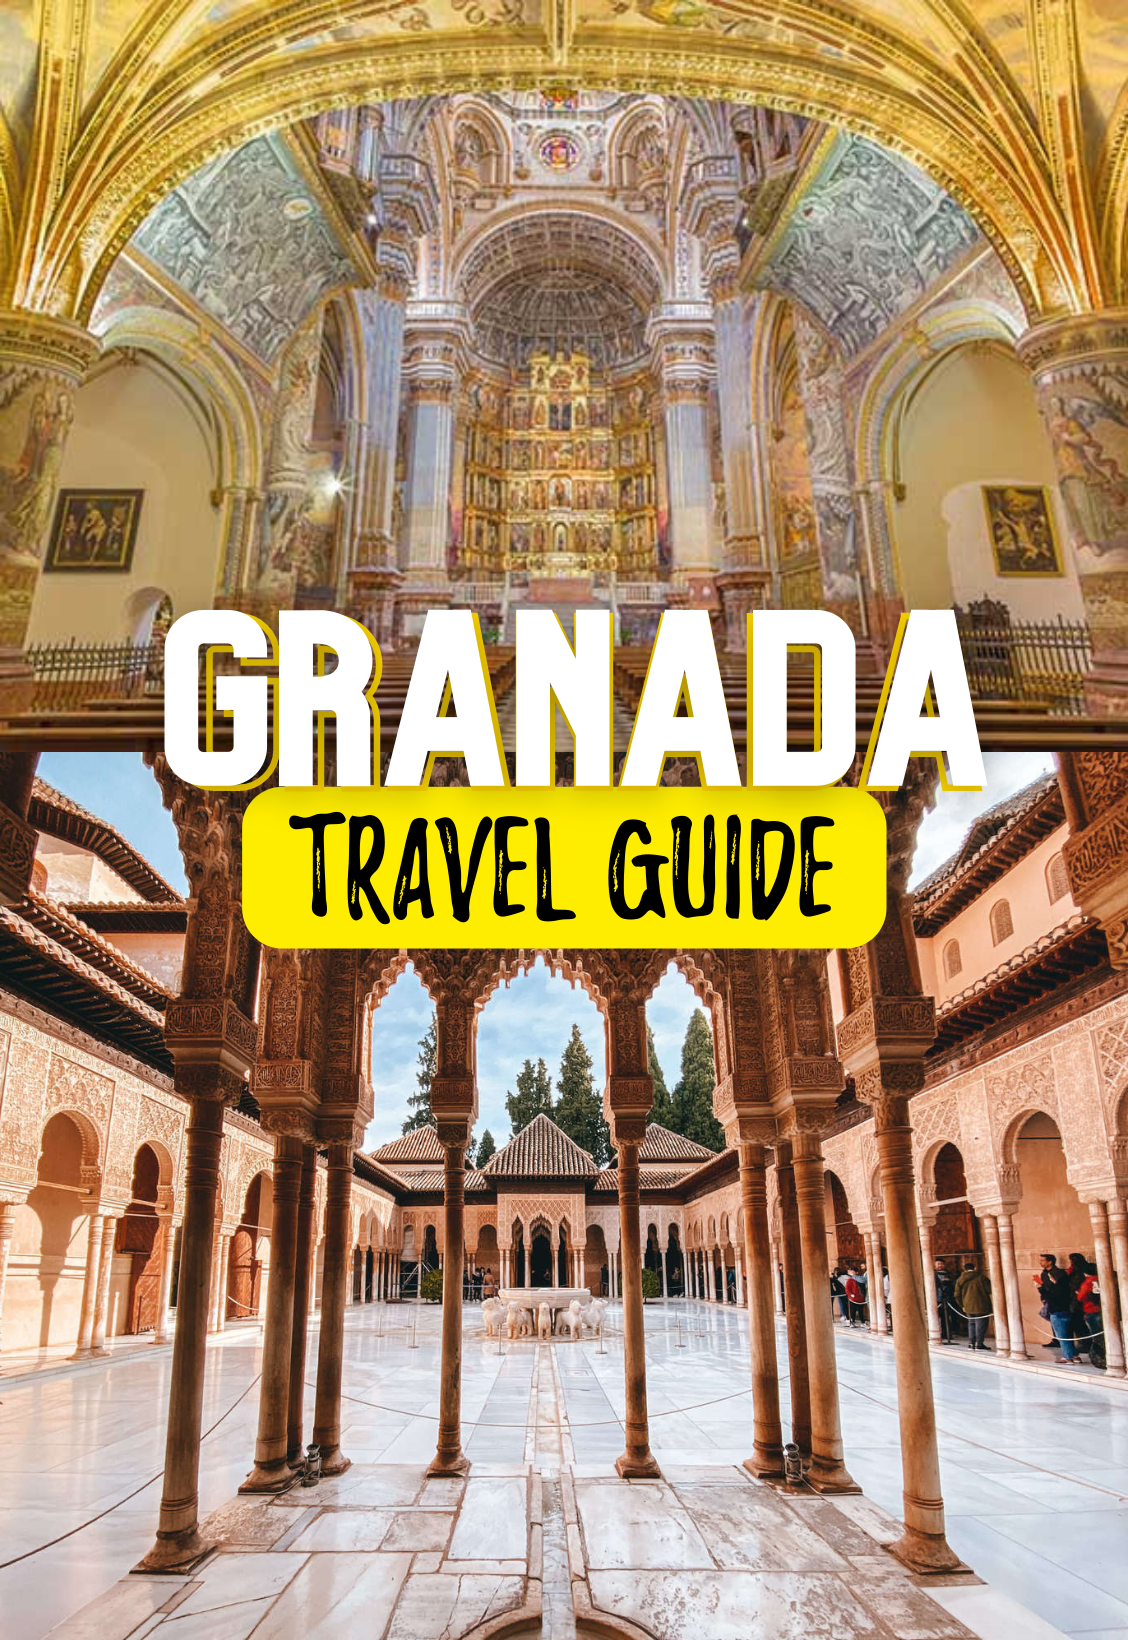 Visit Granada with detailed experiences